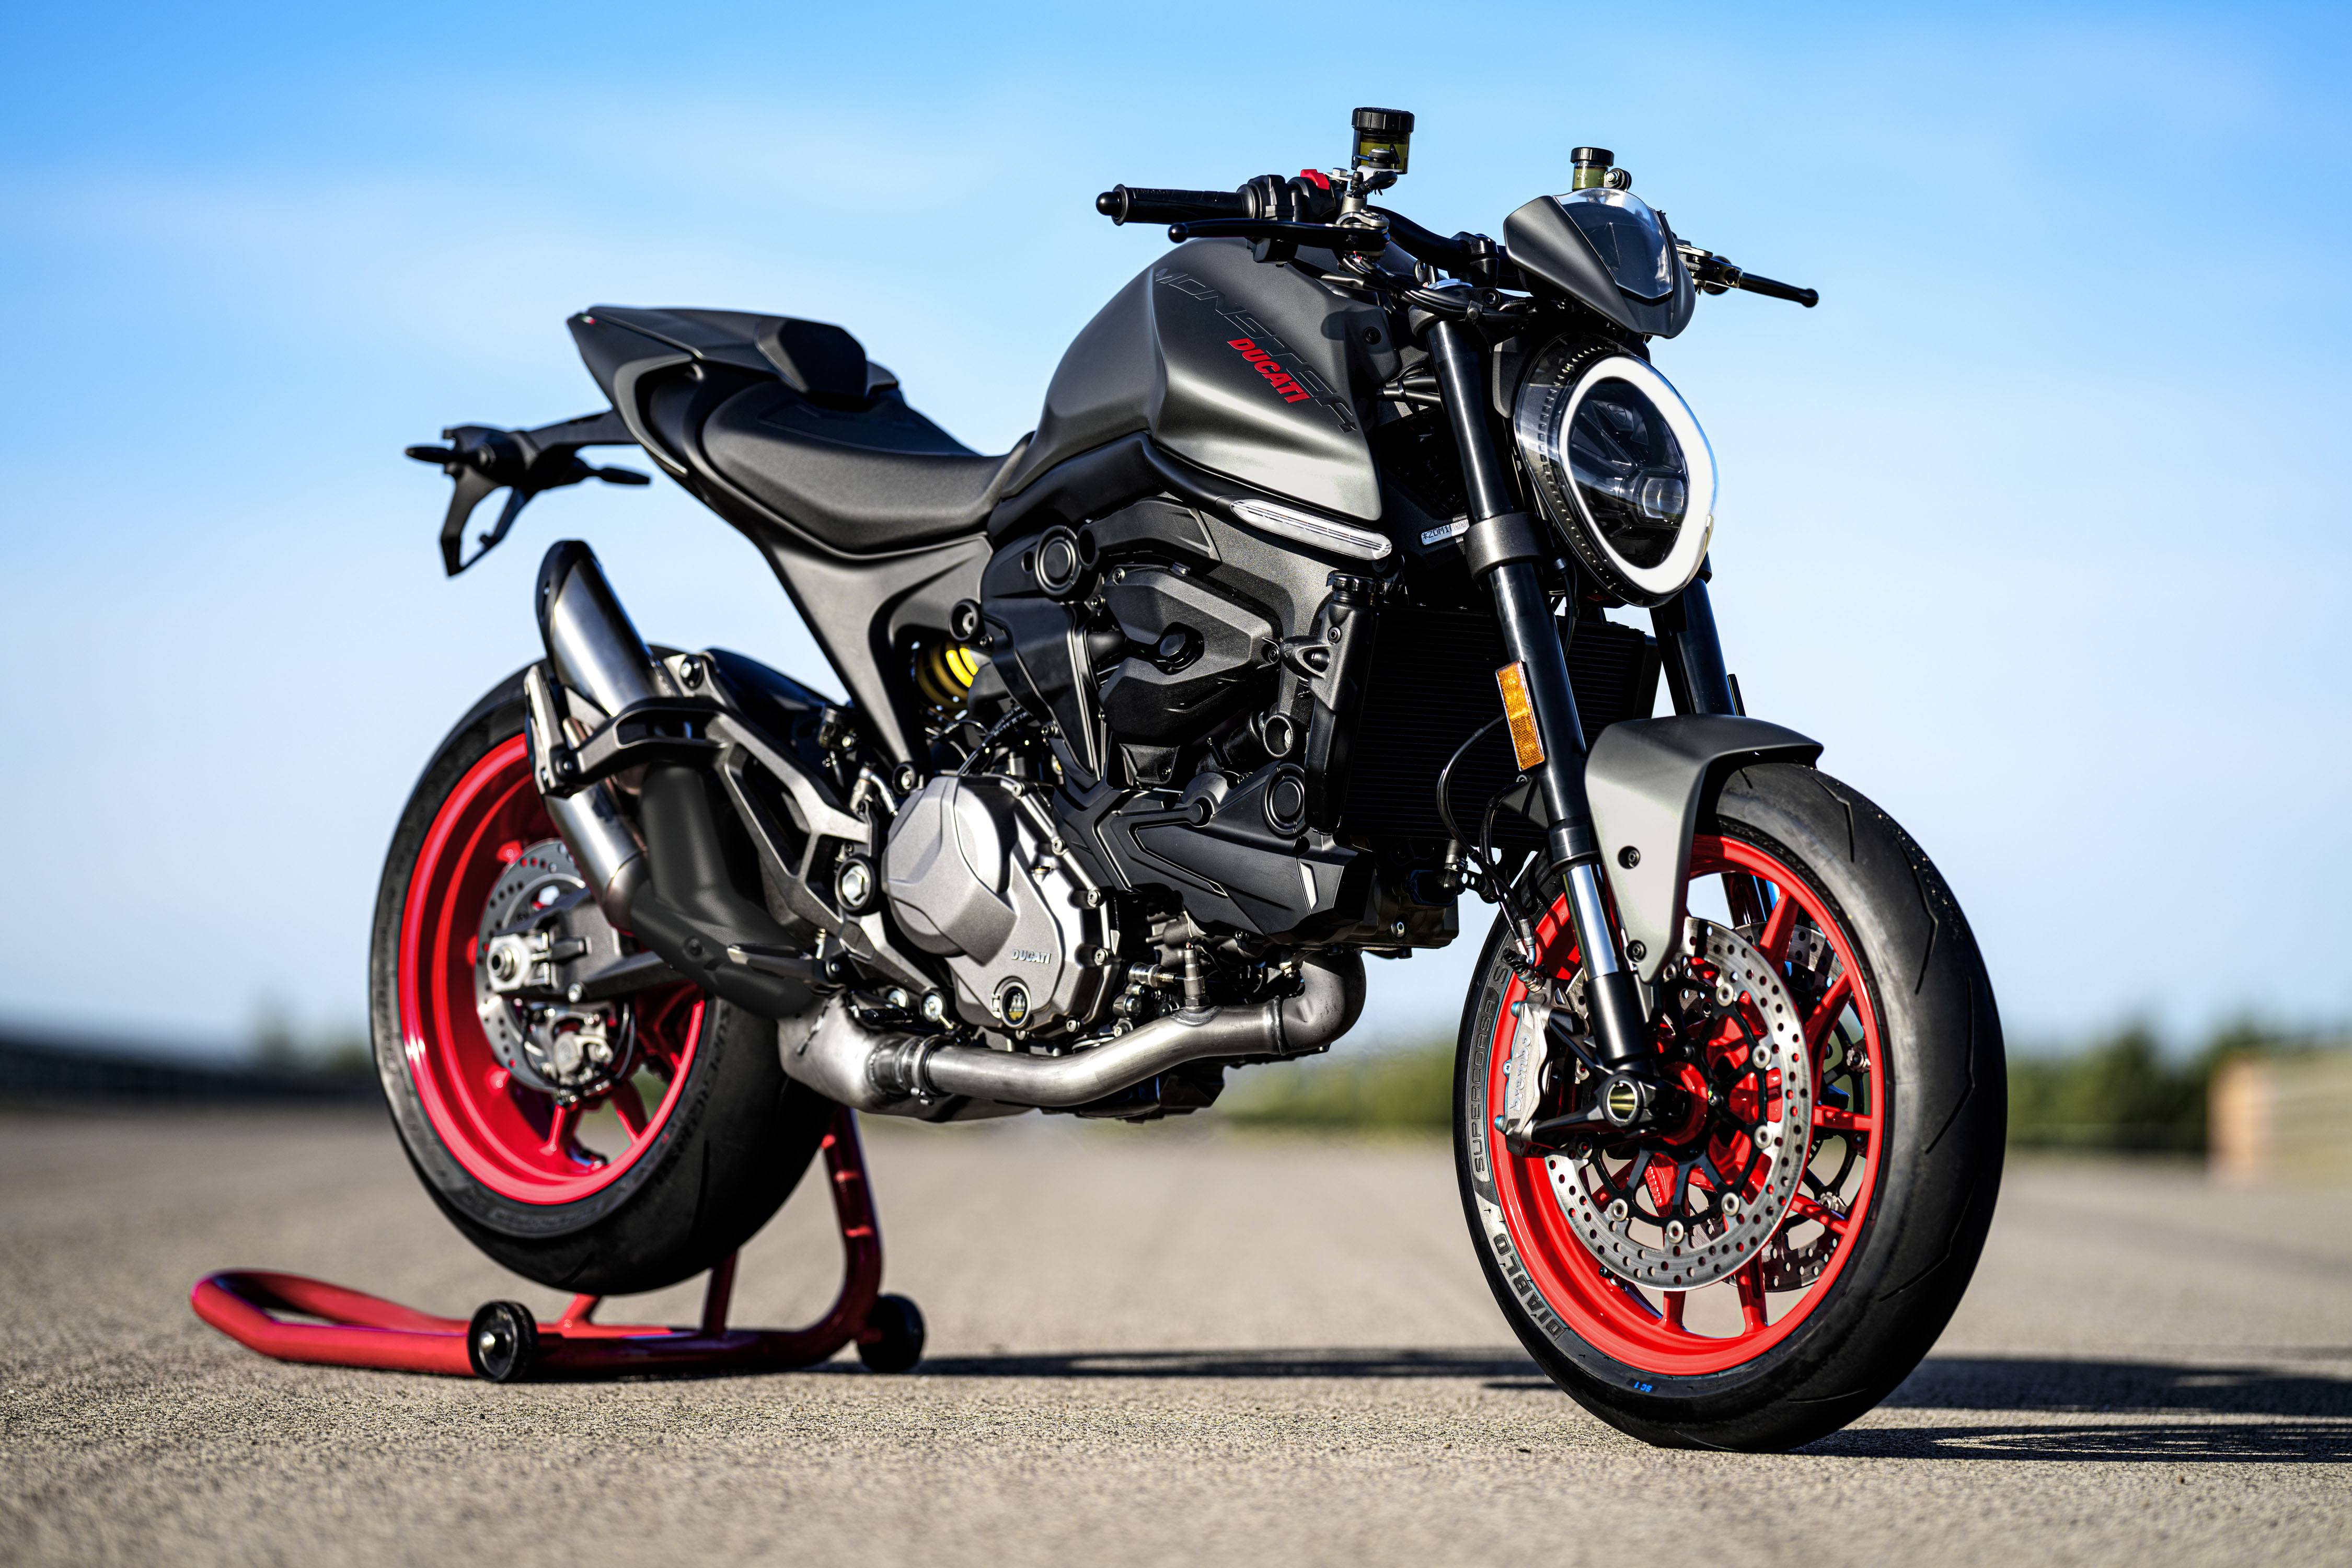 Ducati parked in street: A stunning beauty captured